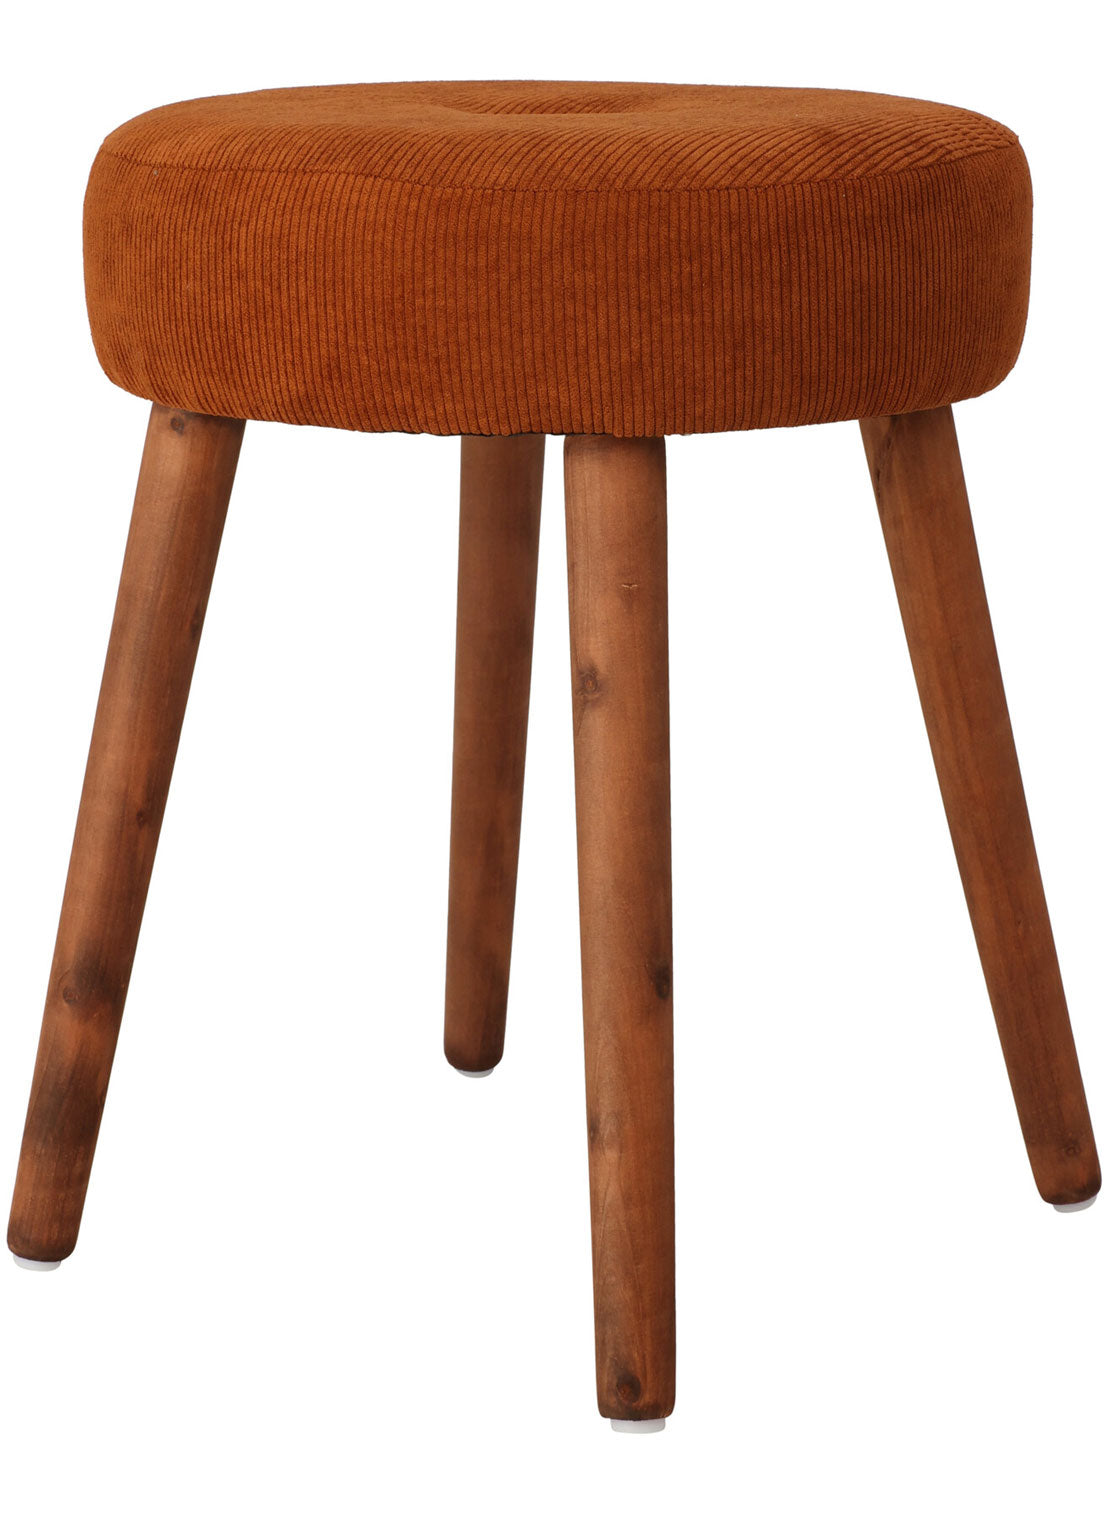 The Home Collection Corduroy Stool 1 Shaws Department Stores